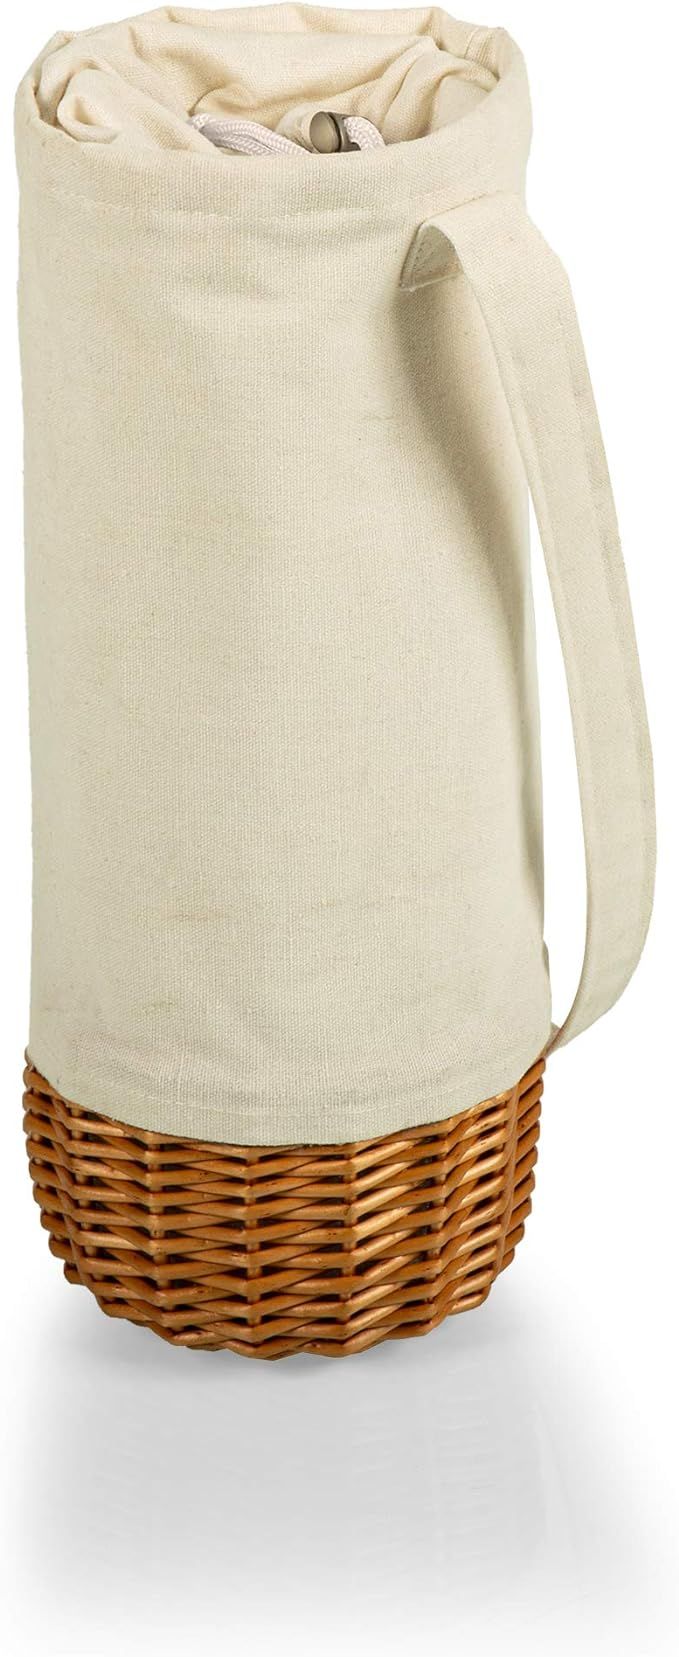 PICNIC TIME Malbec Insulated Canvas and Willow Wine Bottle Basket, Wine Tote, Wine Gift Bag | Amazon (US)